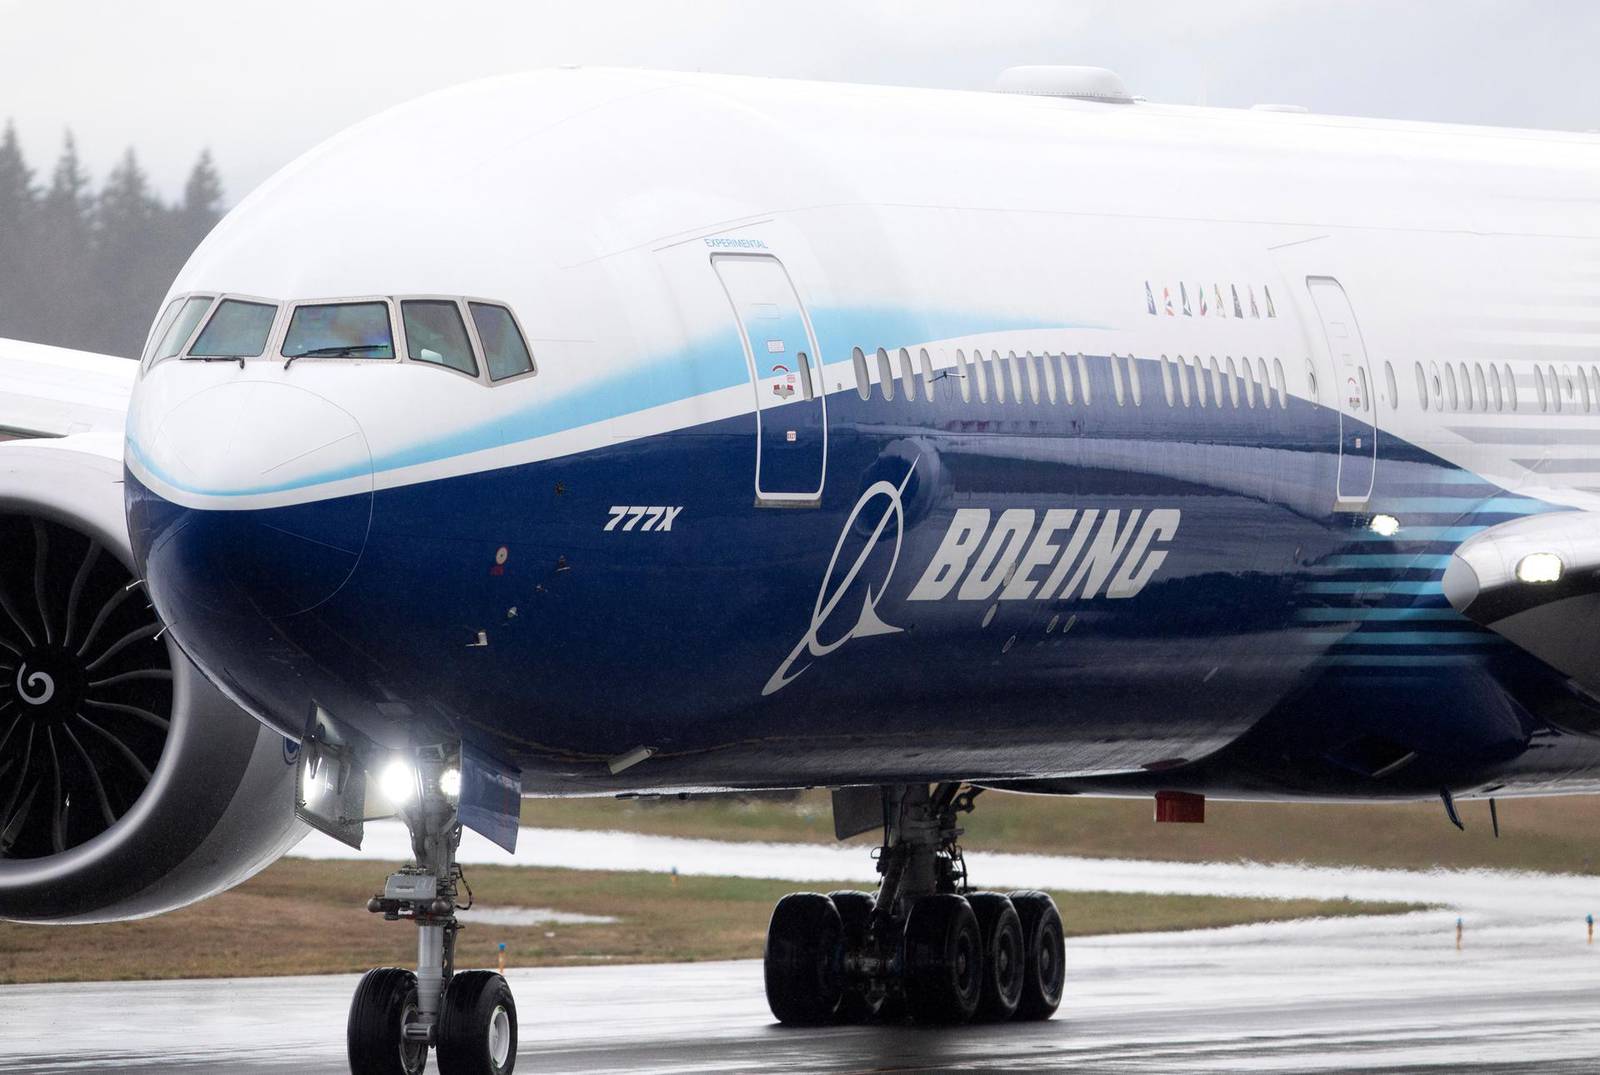 Boeing confirms 777X delayed until 2025, with production paused through to 2023